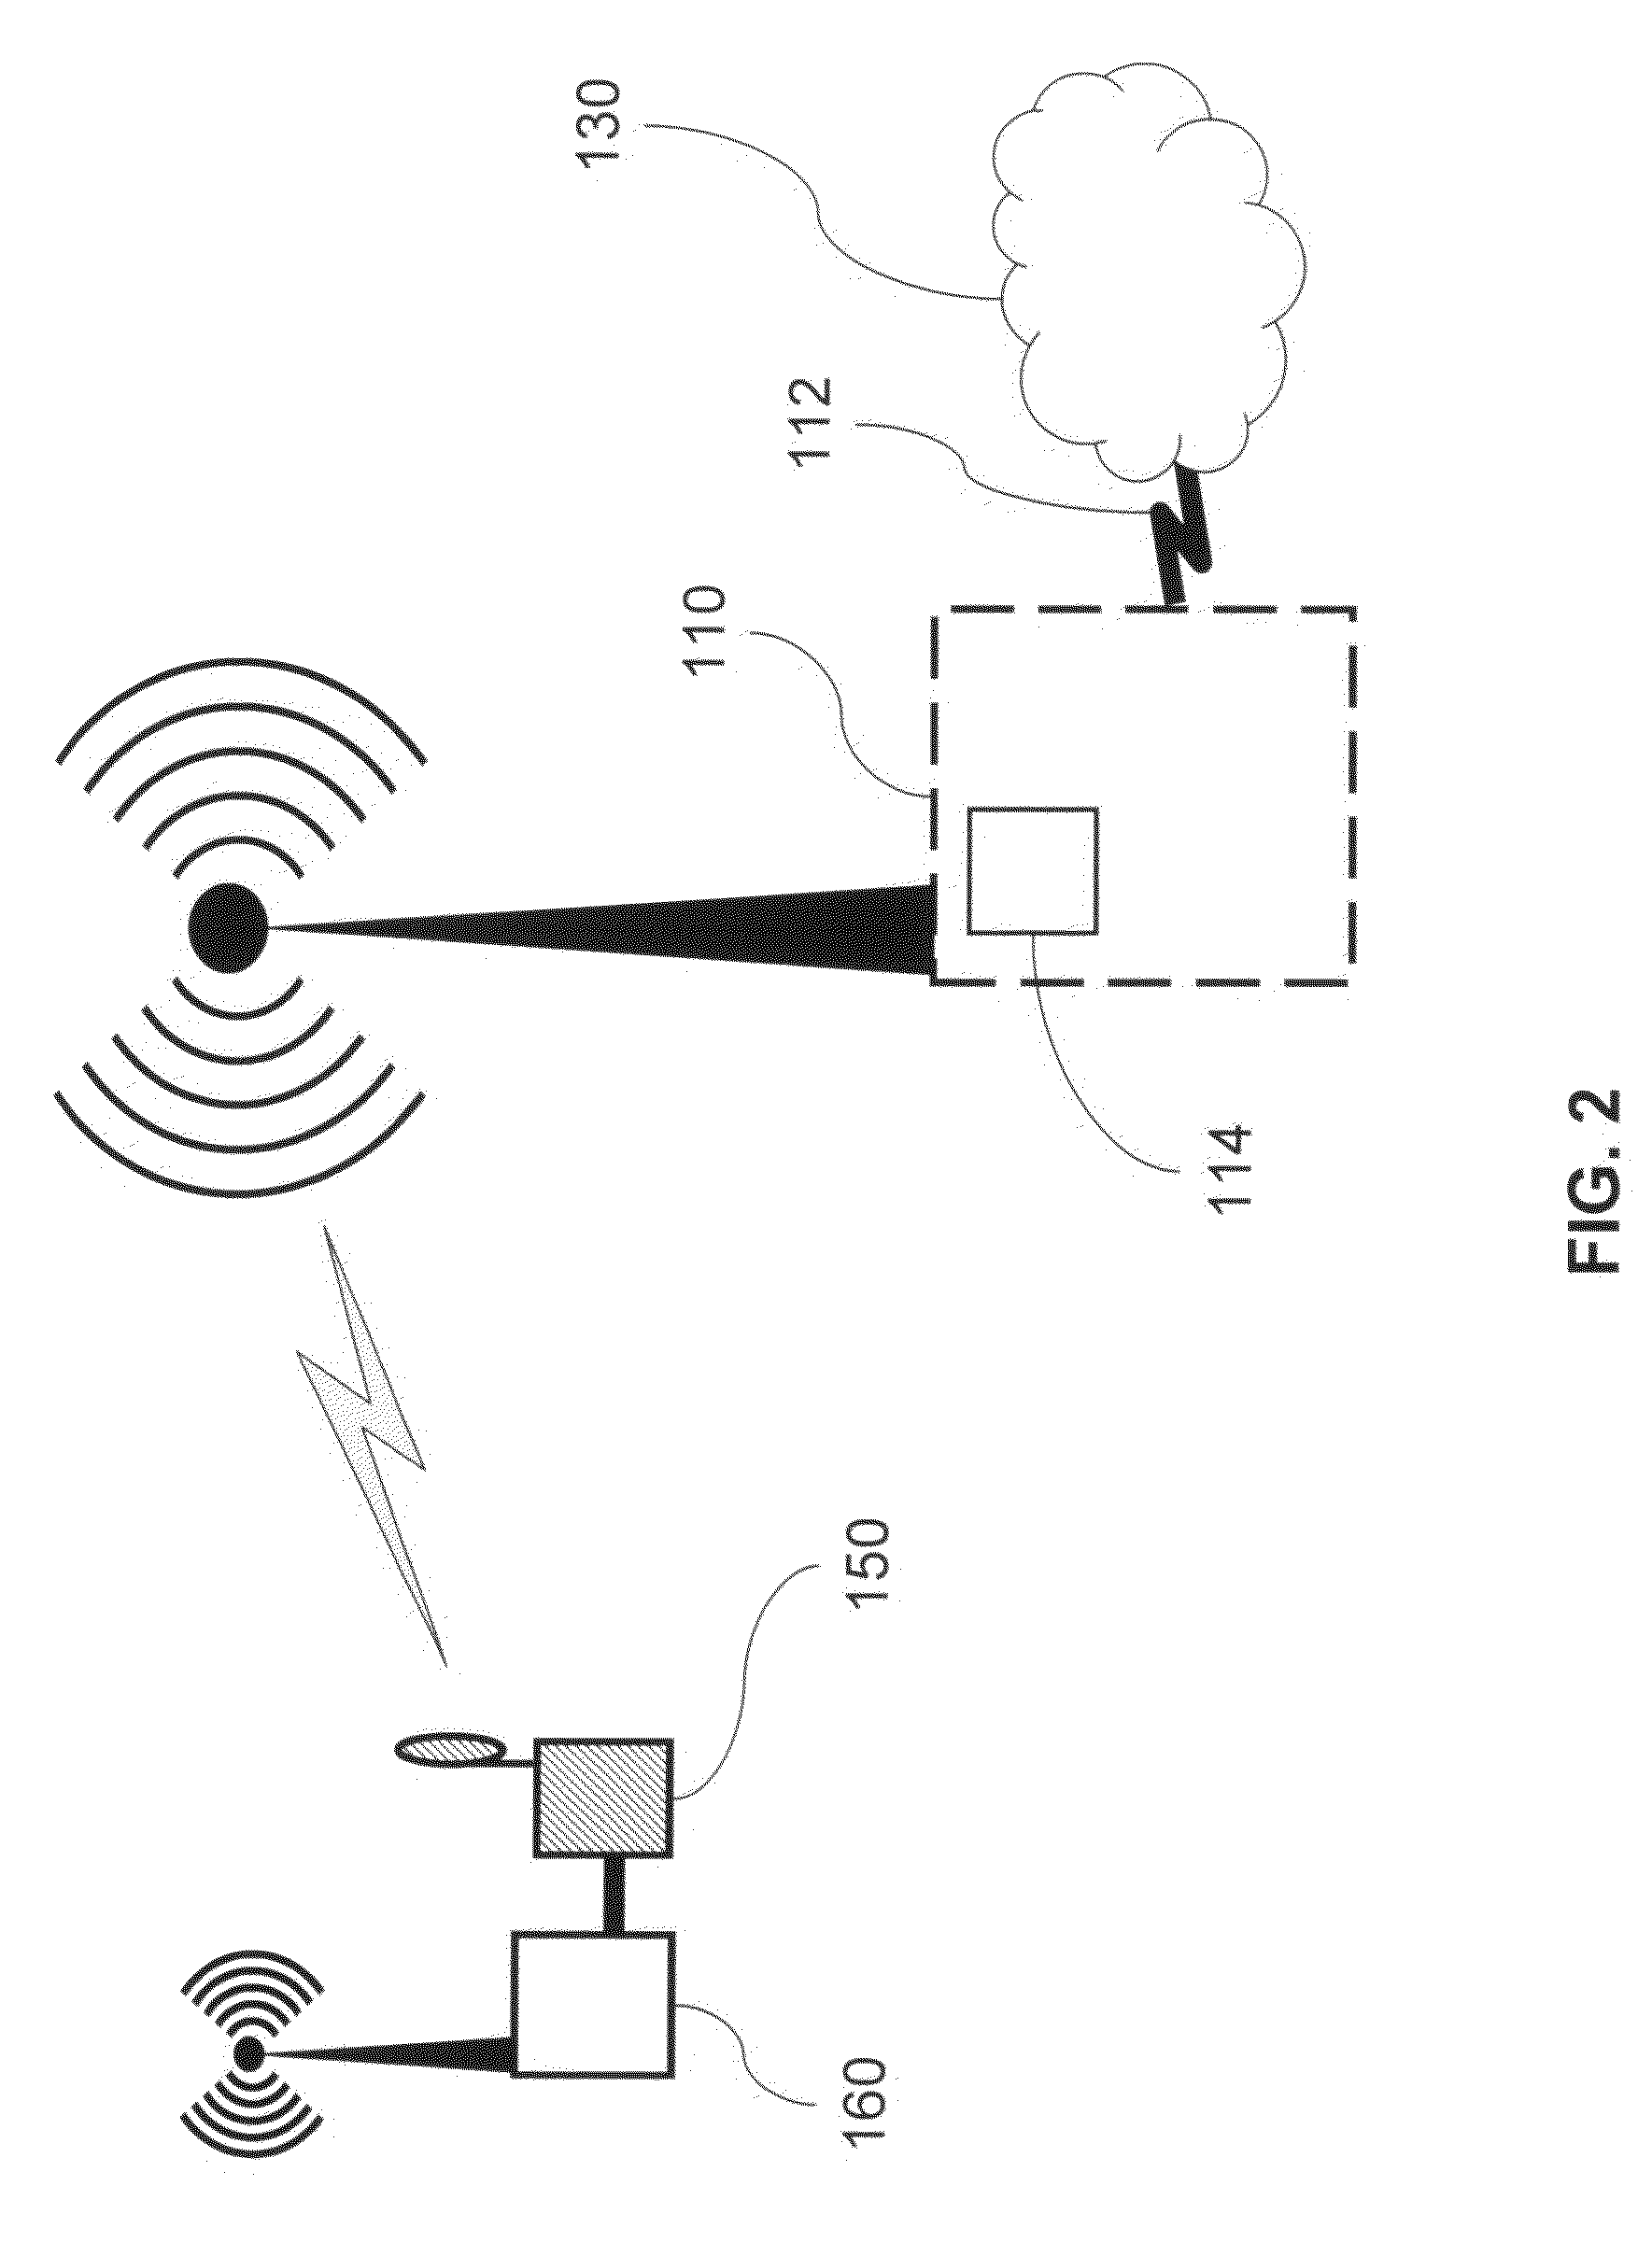 Wireless communications network base station extension